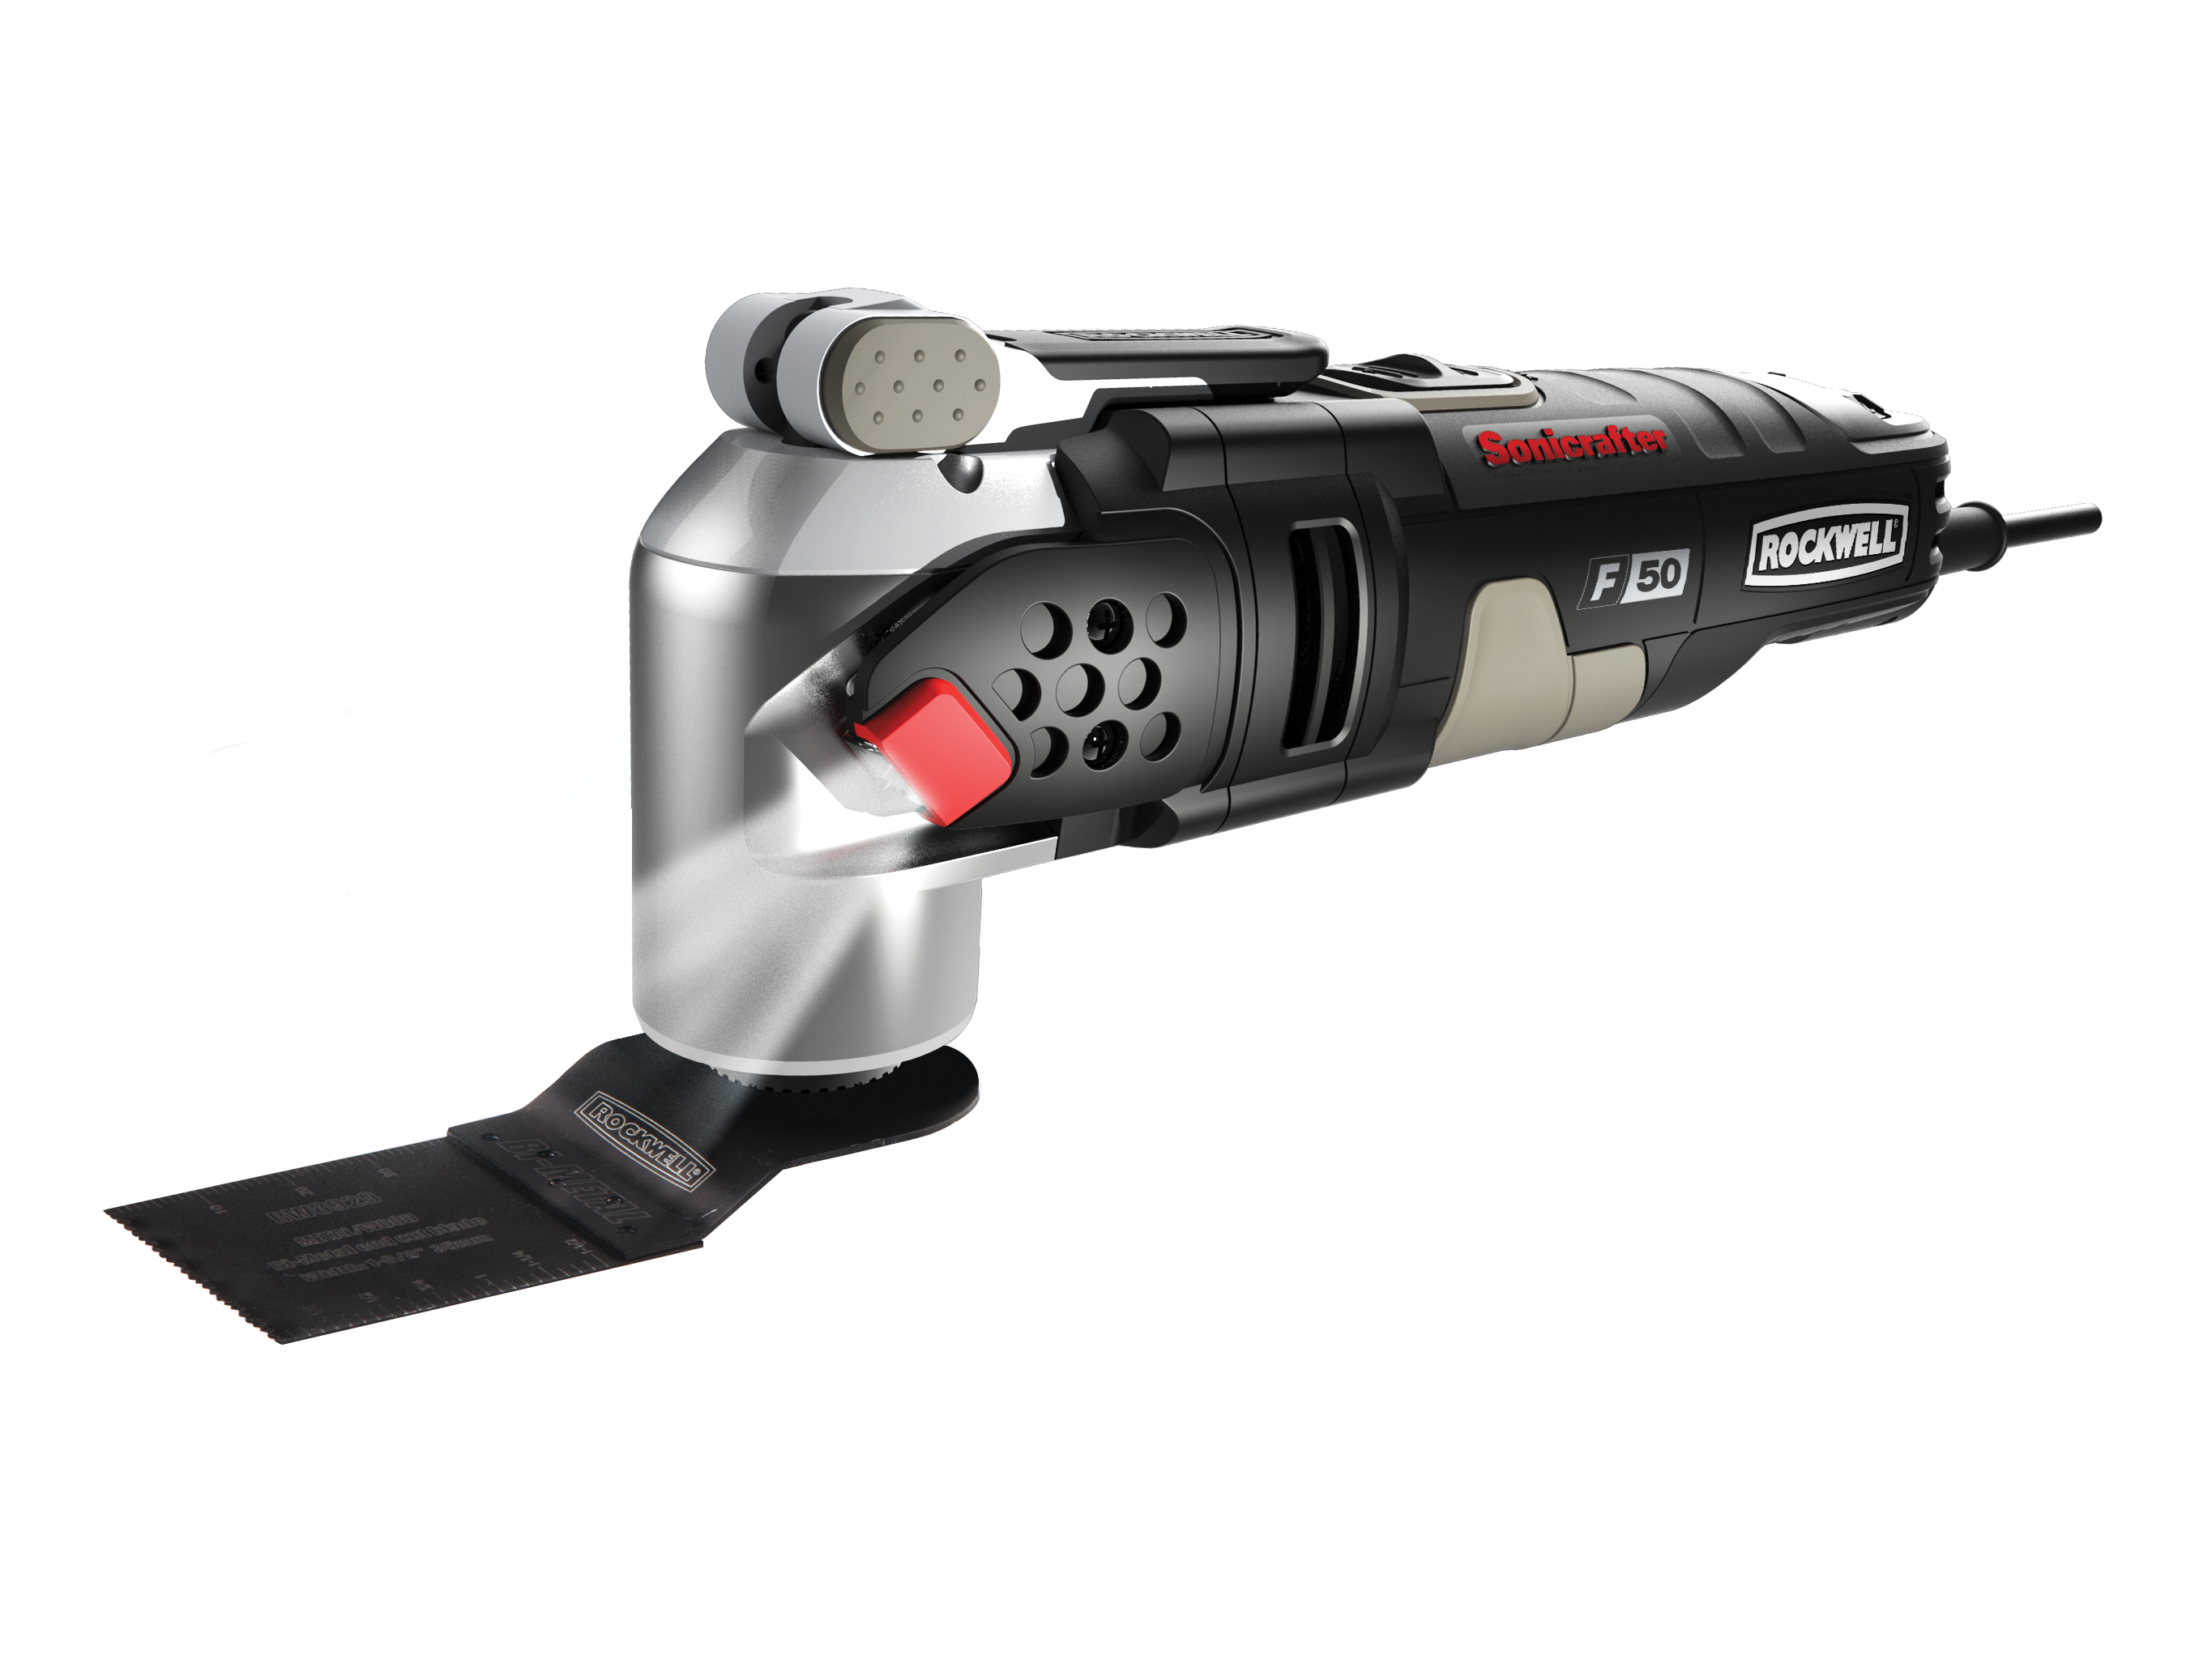 New Rockwell Sonicrafter Oscillating Tools Cut Faster, Work Harder and